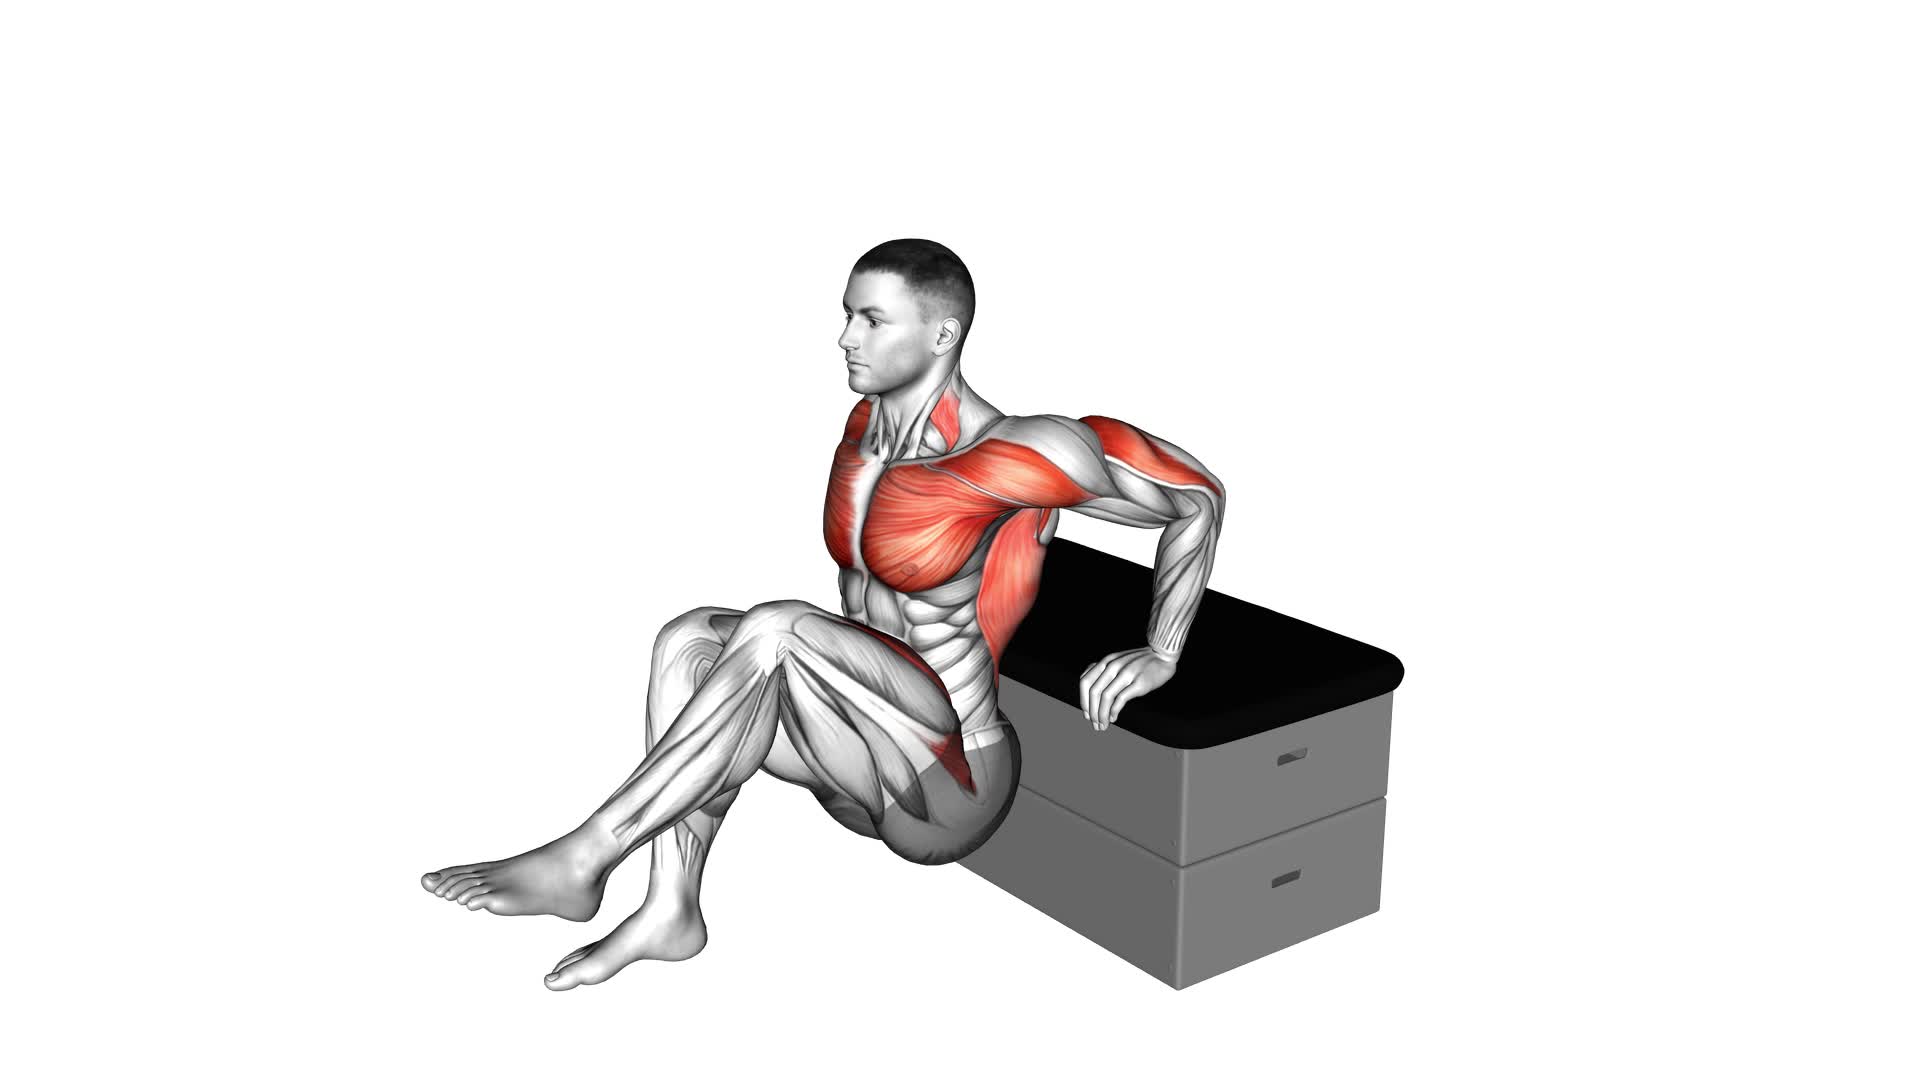 Dip Leg Raise a Padded Stool Supported - Video Exercise Guide & Tips